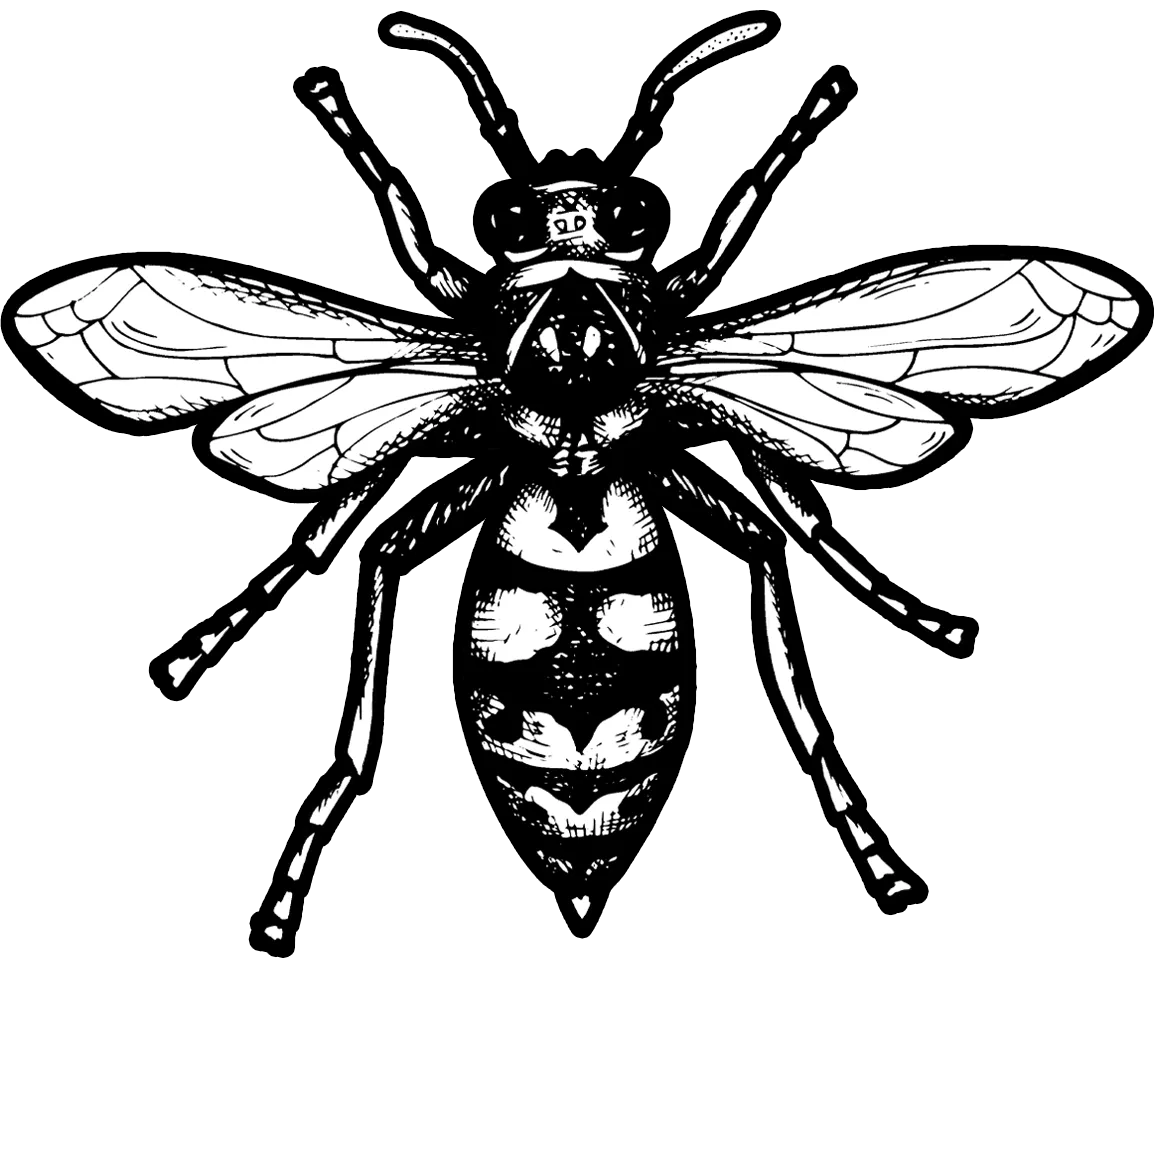 Illustration of a Wasp